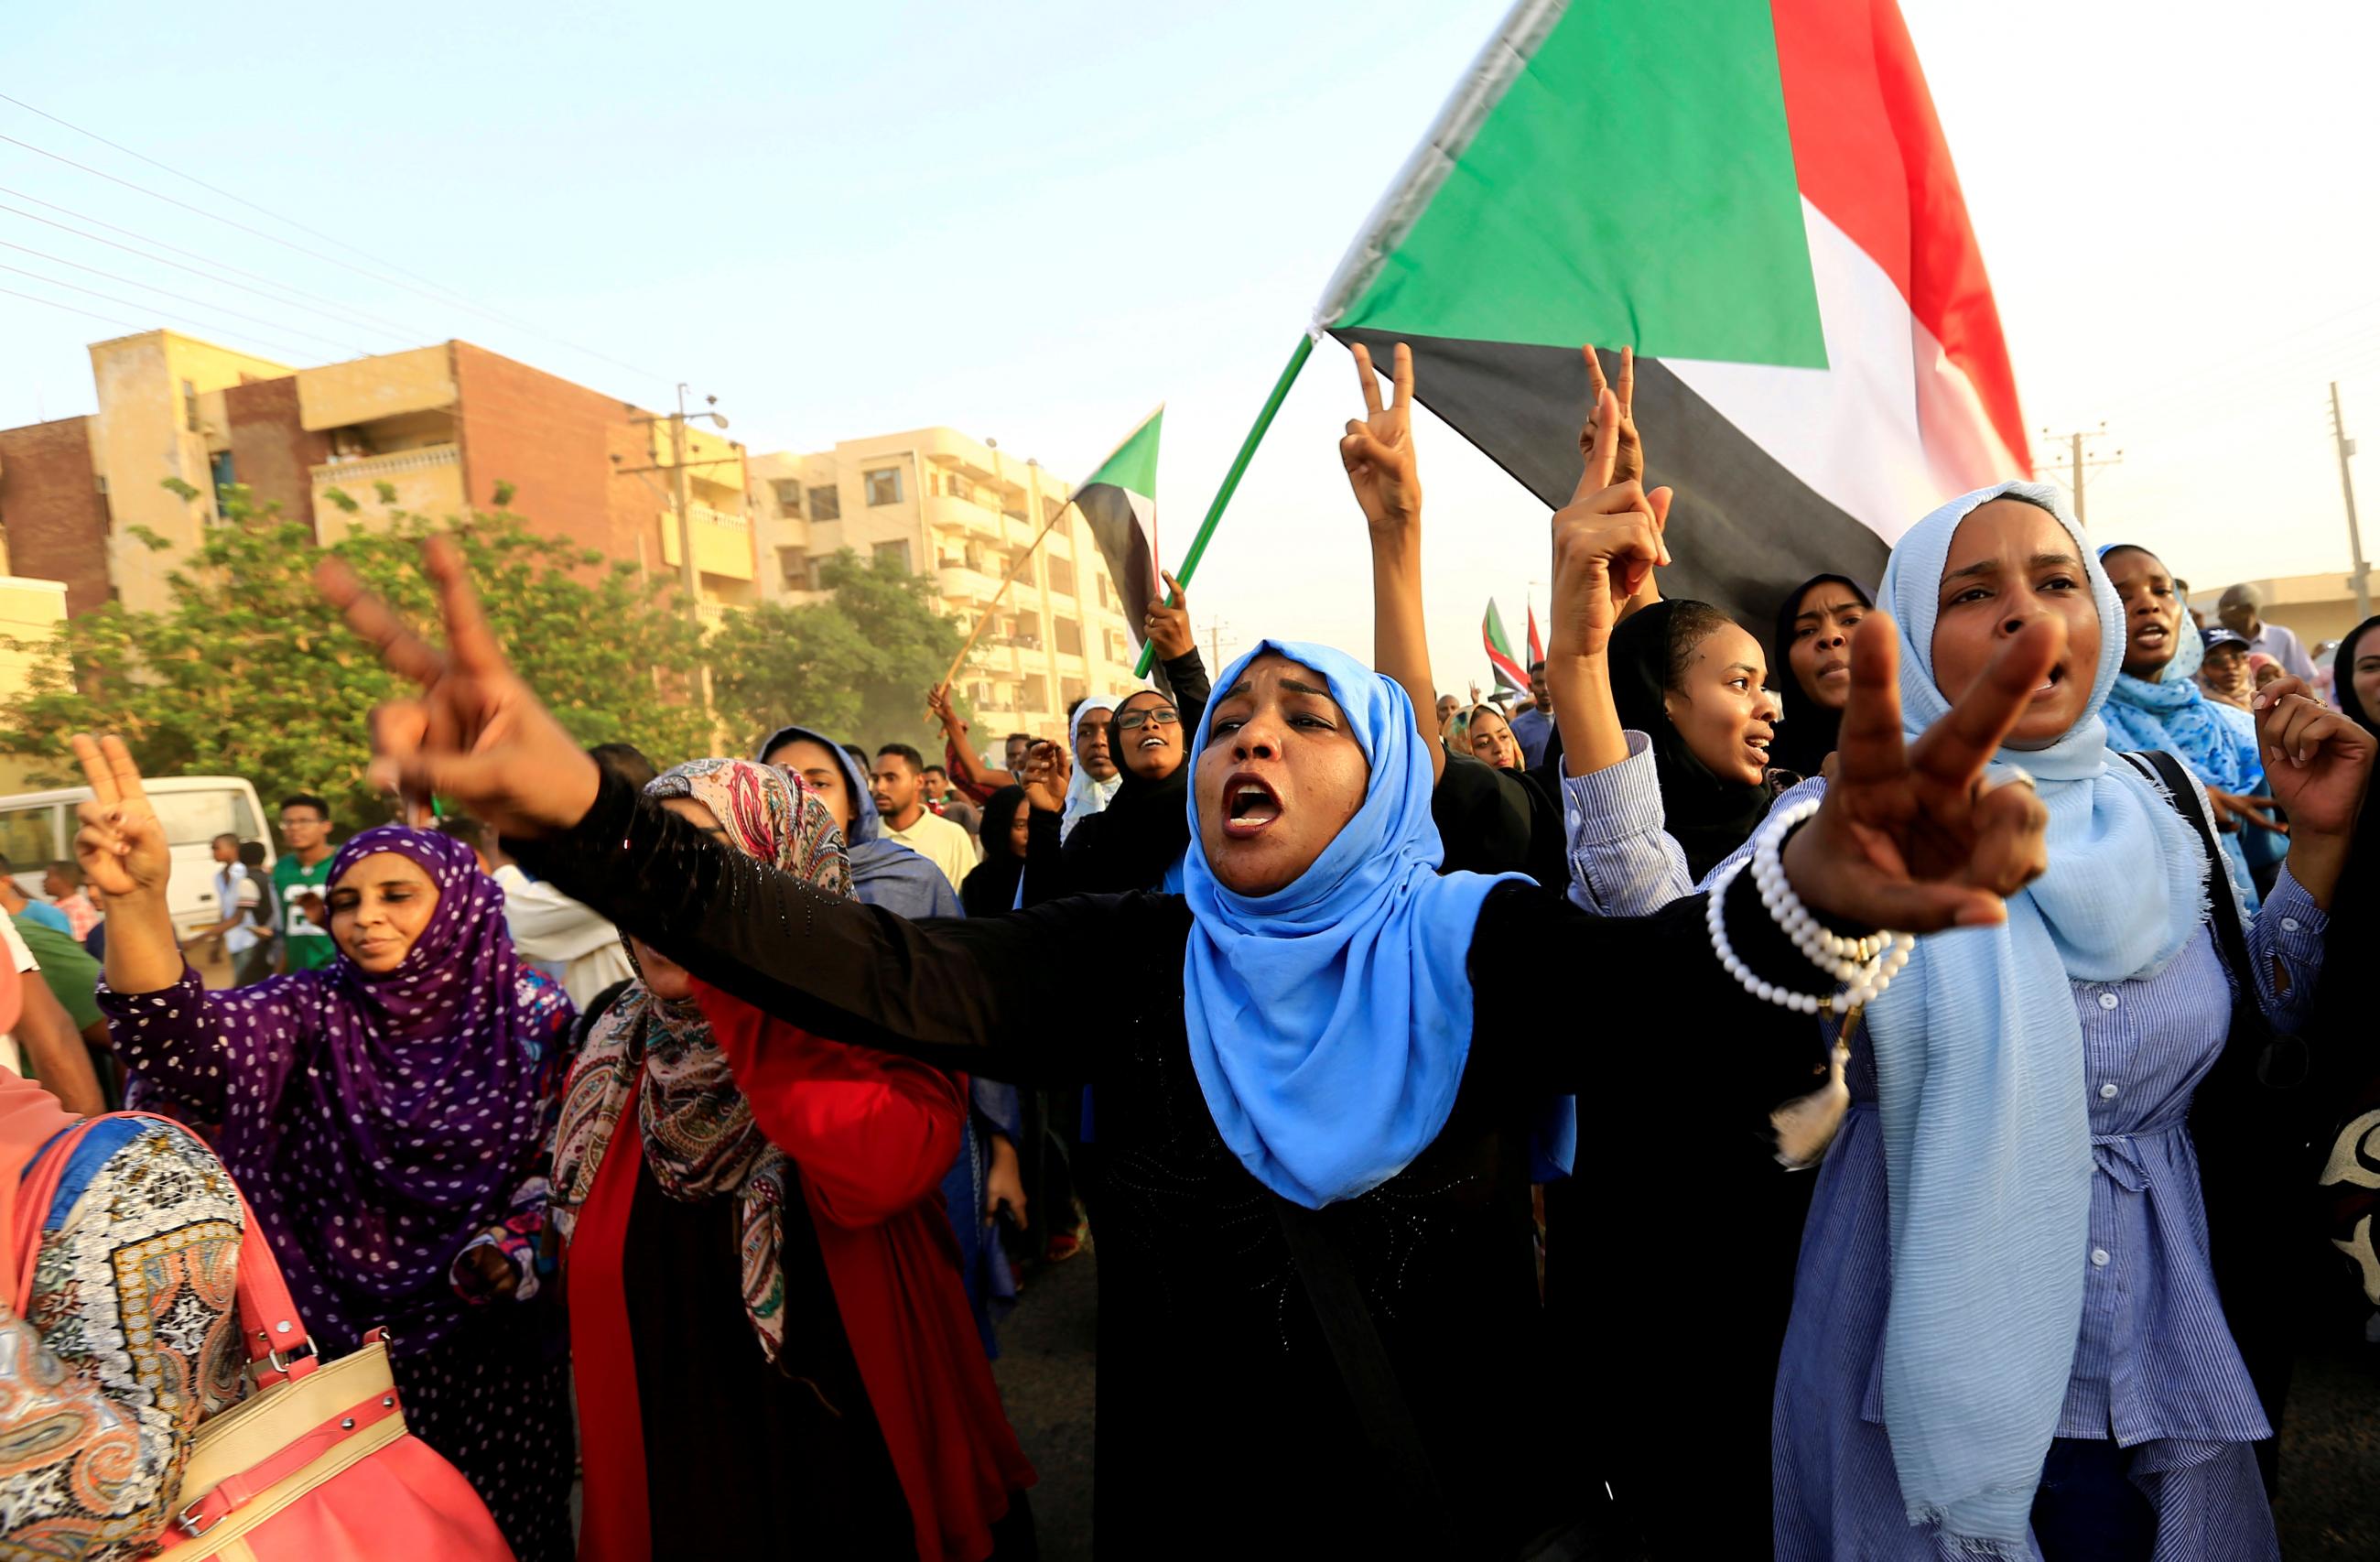 Sudanese protesters march during a demonstration to commemorate 40 days since the sit-in massacre in Khartoum, Sudan. Photo taken on July 13, 2019.